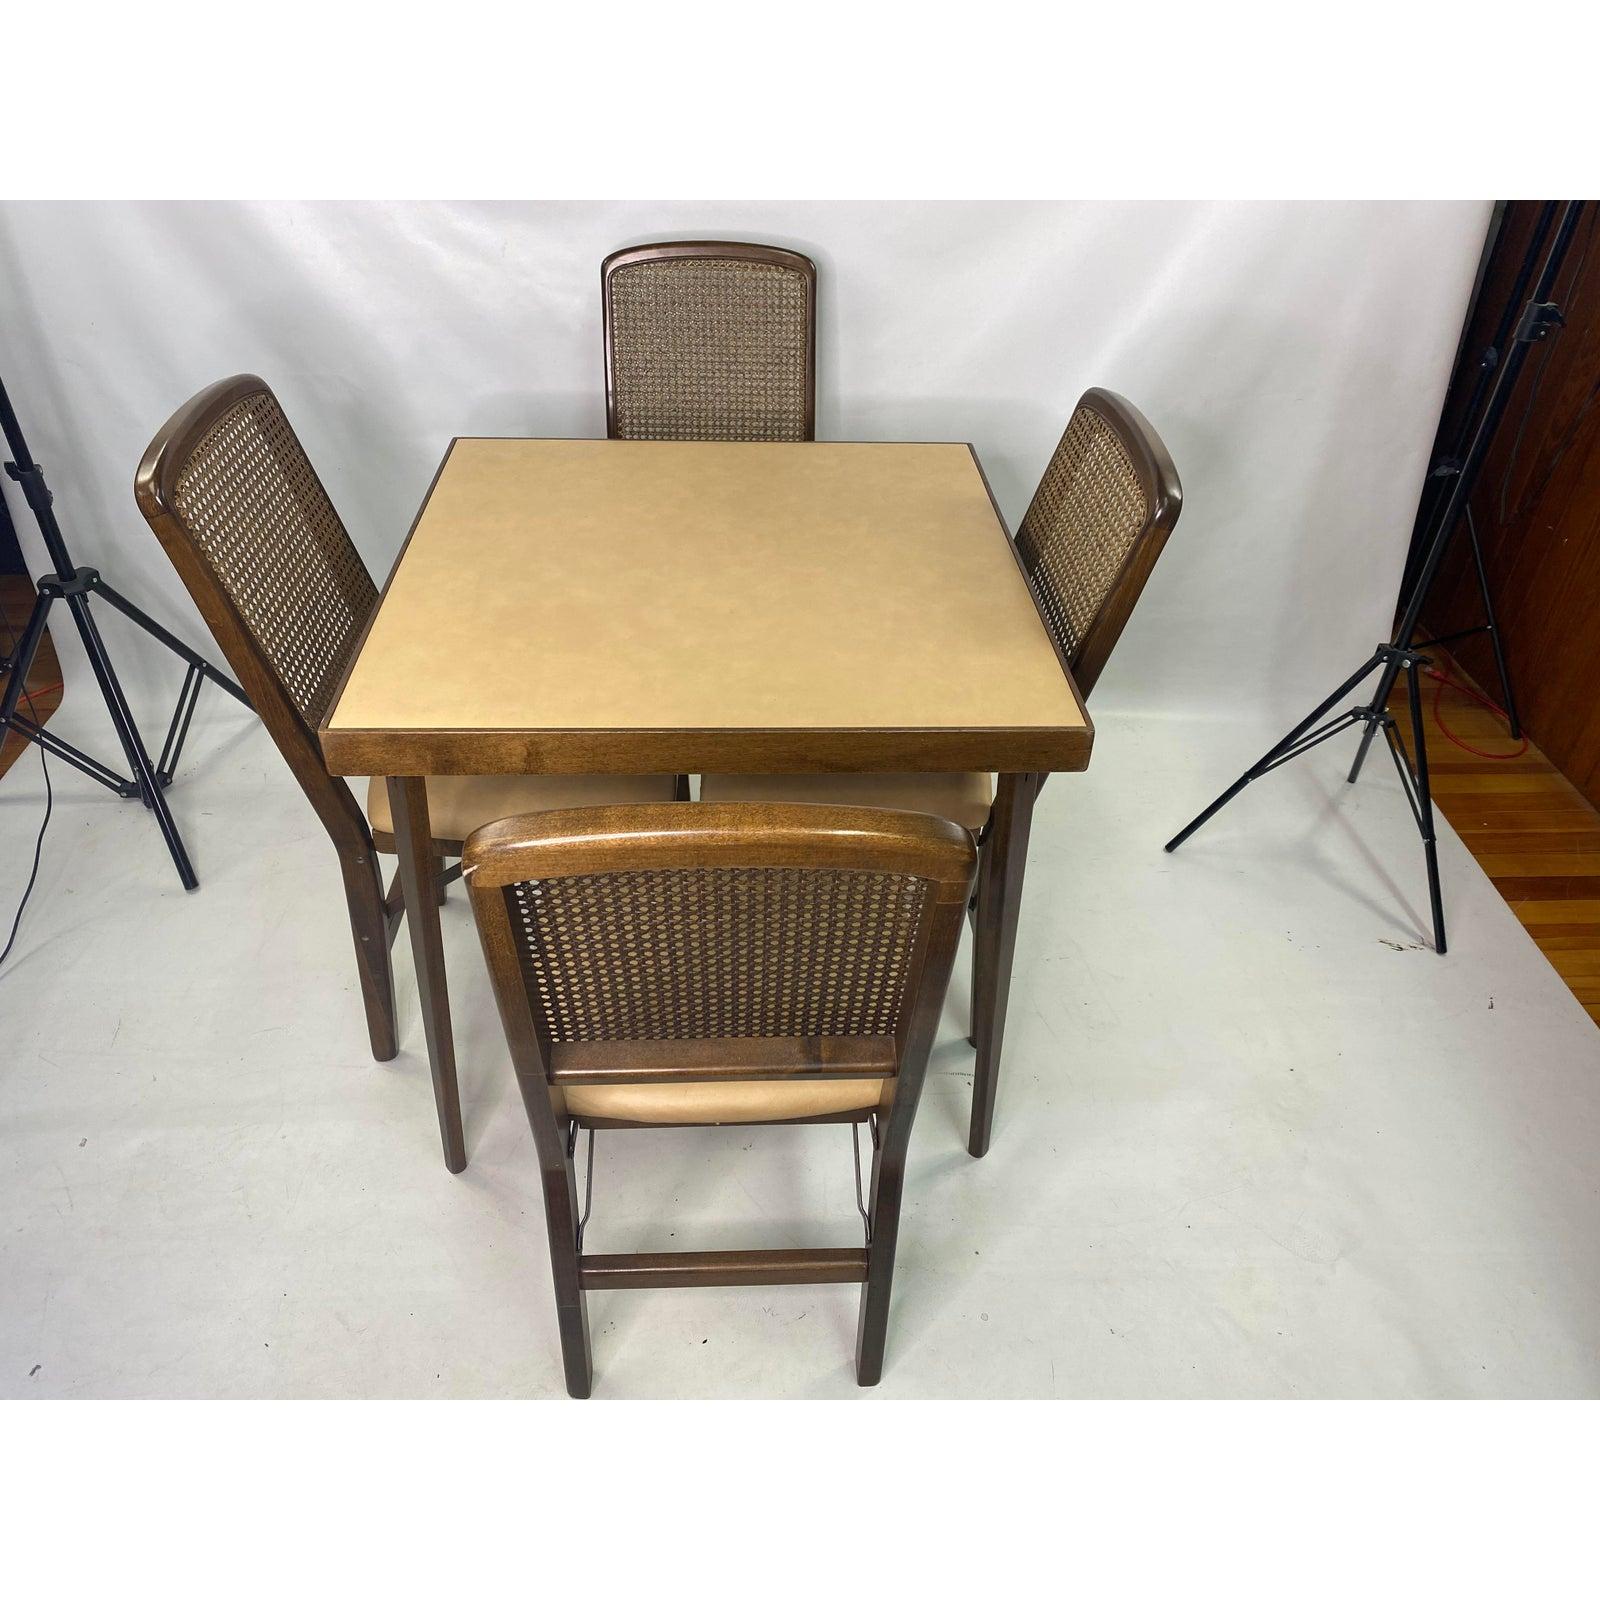 Mid-Century Modern walnut and vinyl folding games table set, Circa 1960s - 5 pieces
Table measurements are: H: 28 1/2”. W: 30” D: 30” 
Seat Height: 18